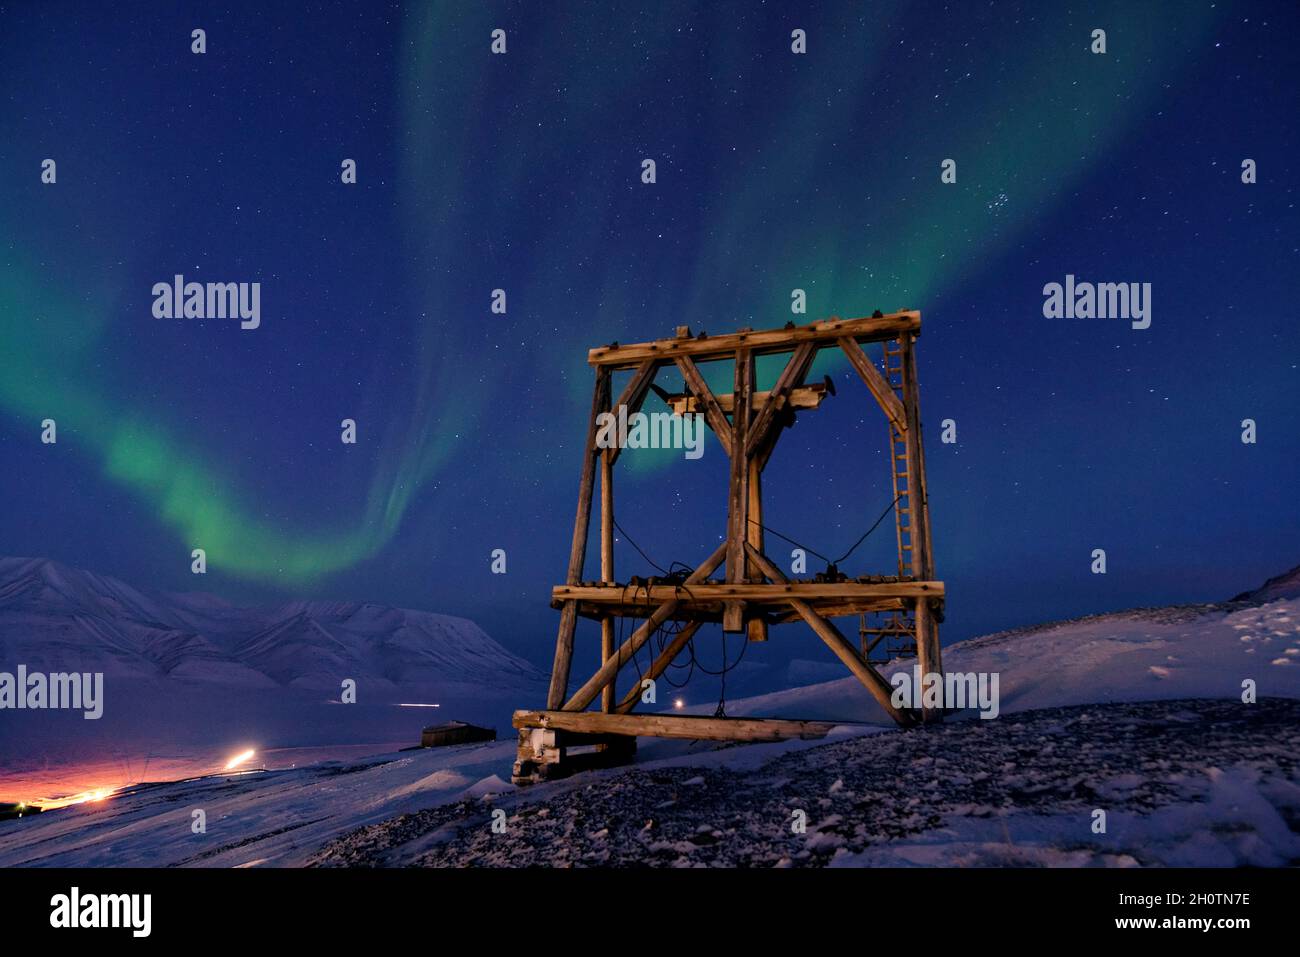 Dark season on Svalbard with polar night and northern lights. Wooden pylon of the ancient aerial tramways to transport coal. Longyearbyen, Spitsbergen Stock Photo